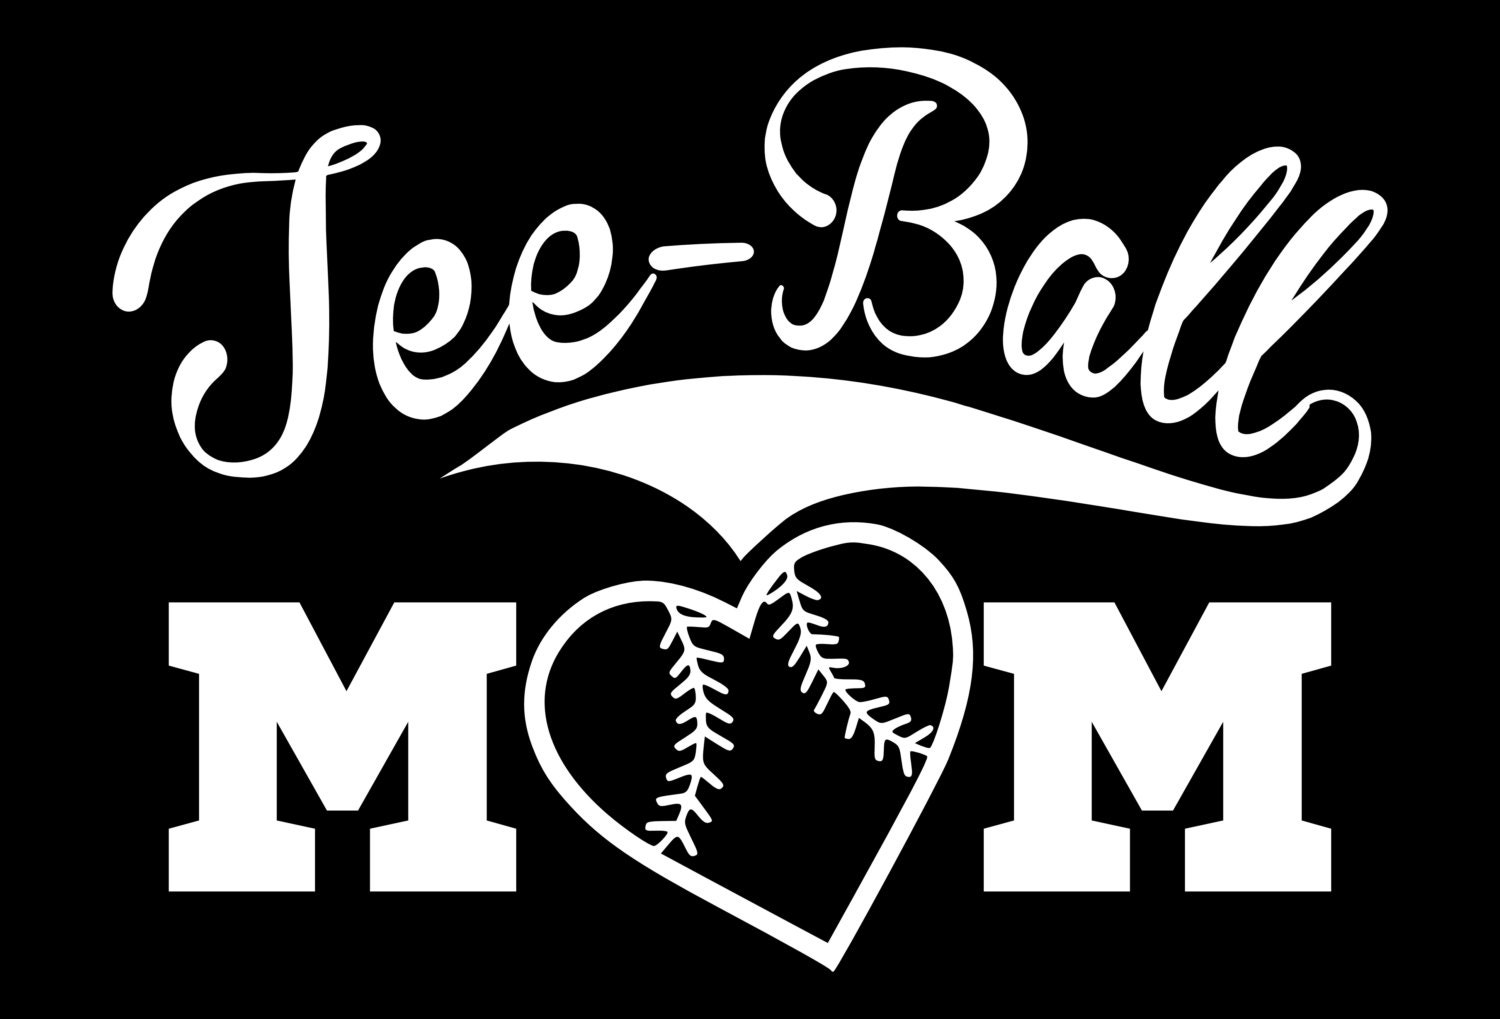 Download Tee-Ball Mom Vinyl Decal Sticker by AutumnDesigns2000 on Etsy